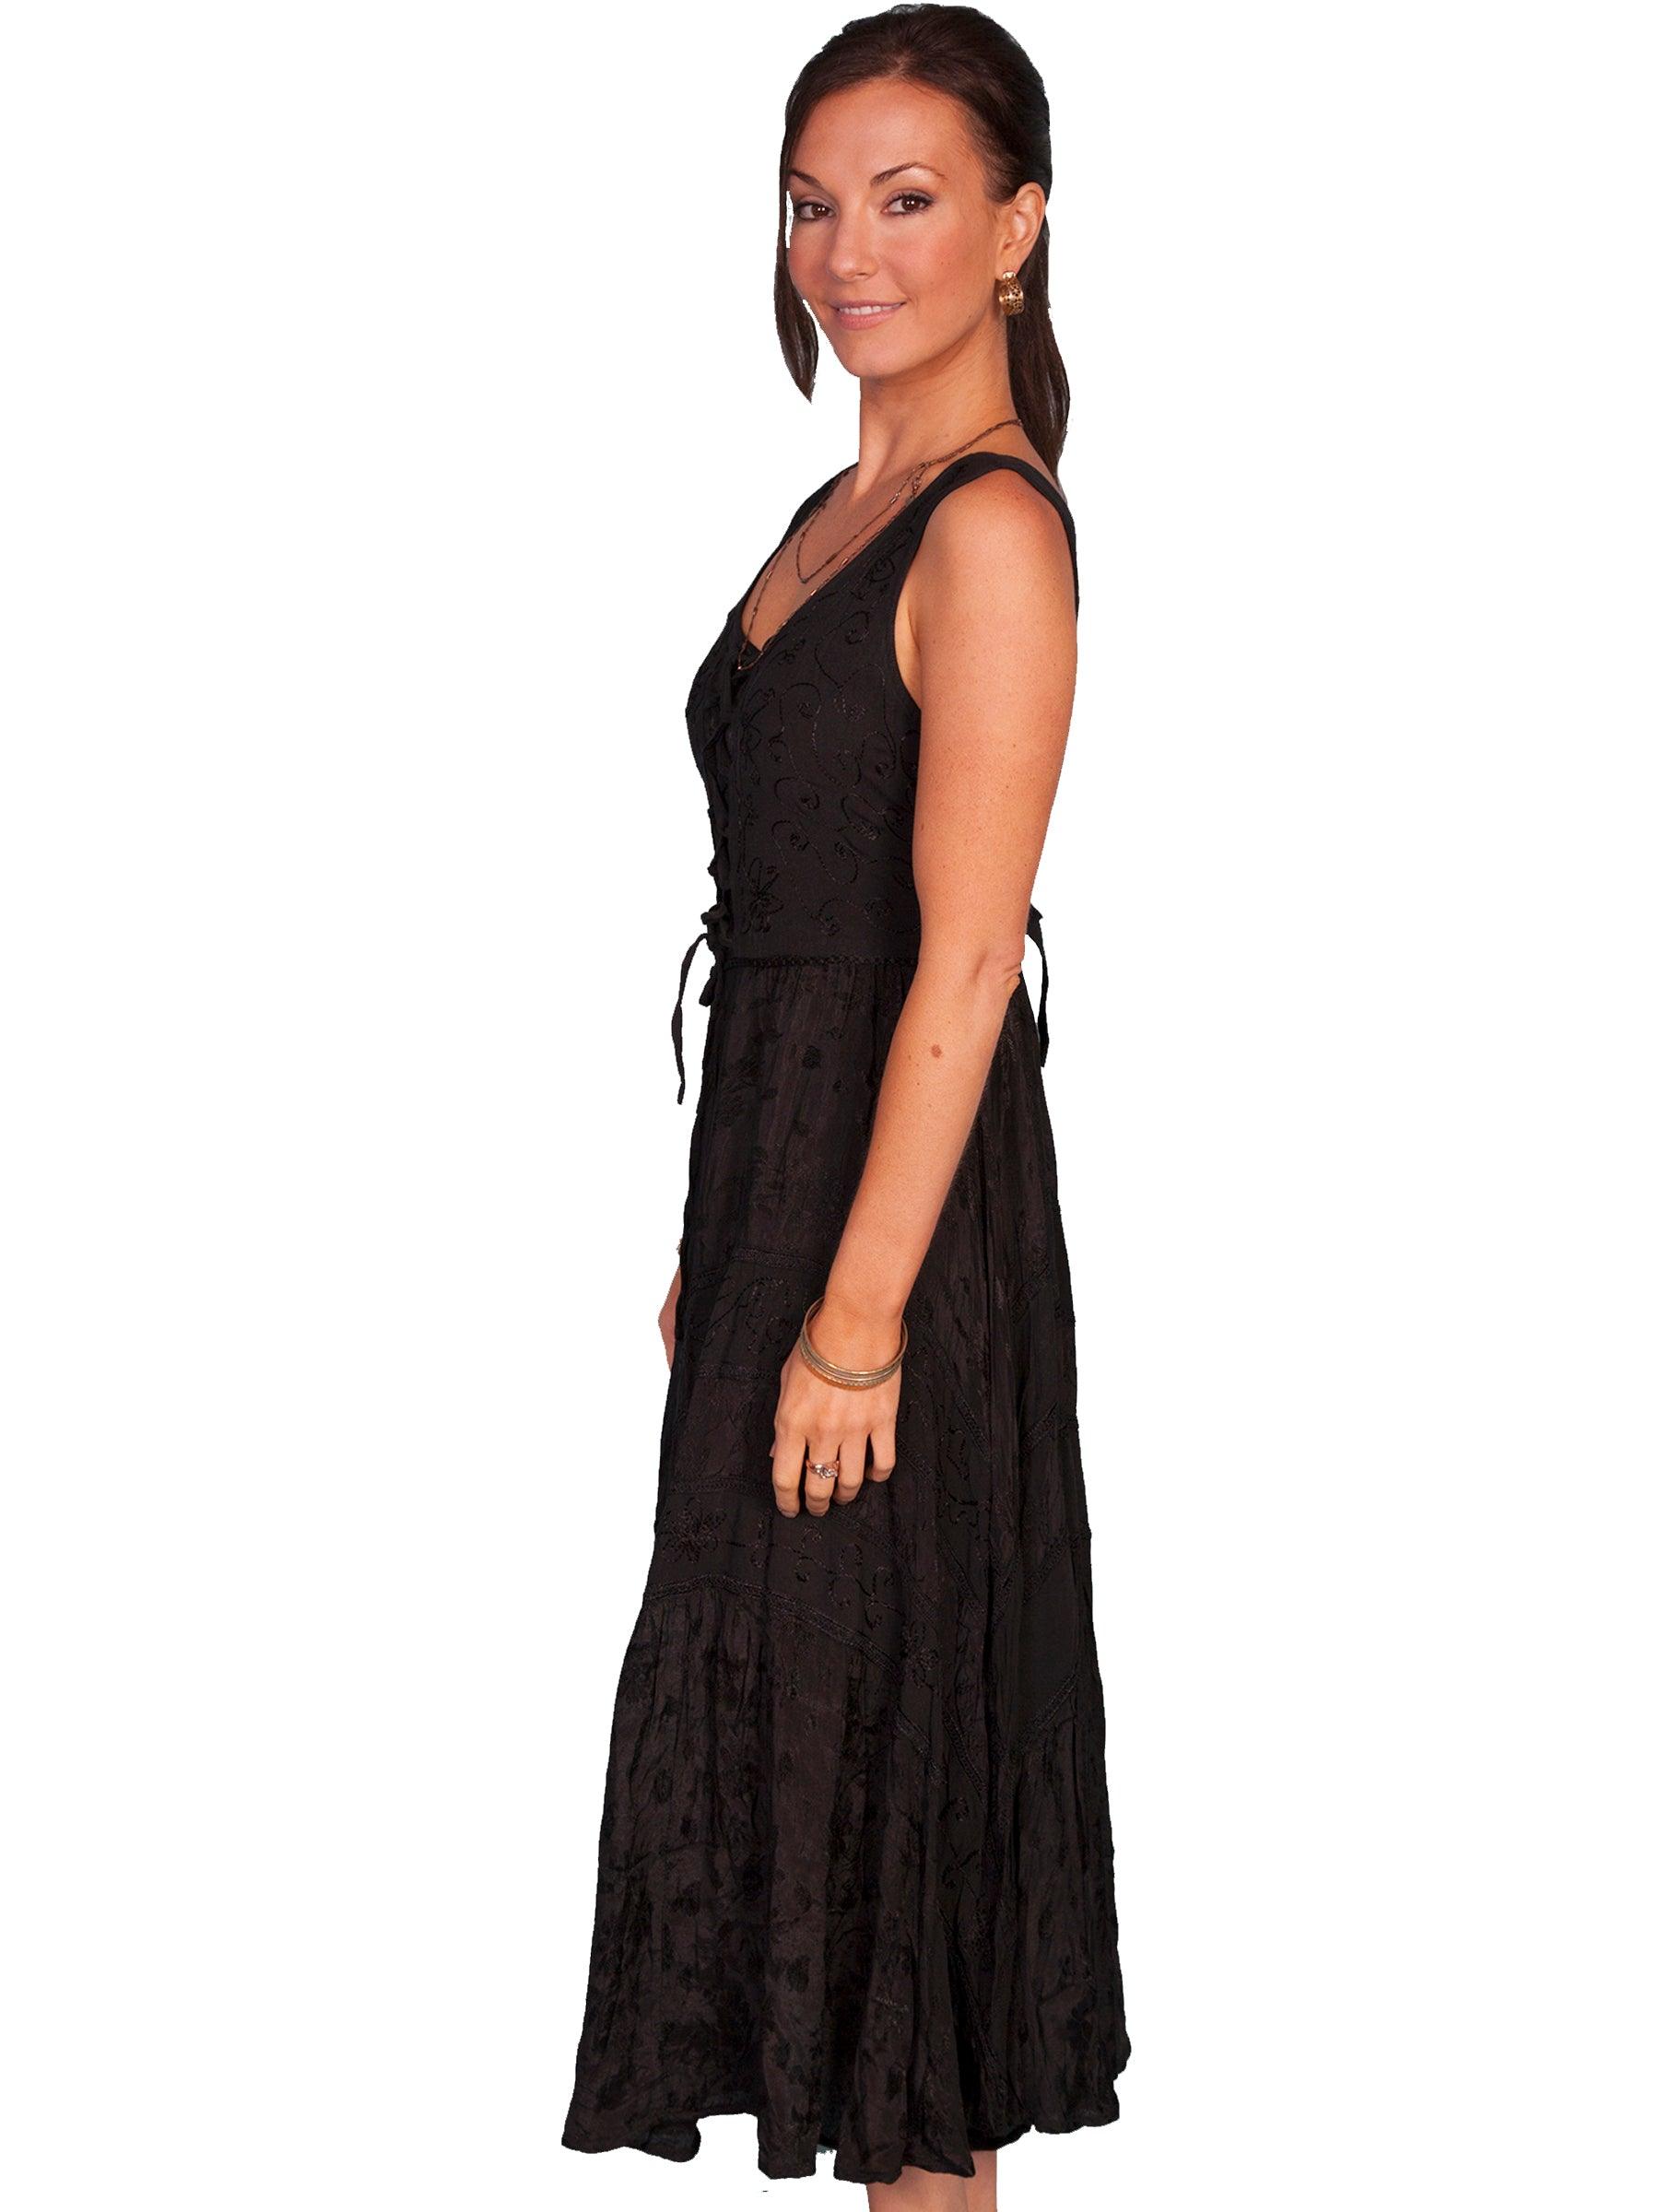 Scully BLACK LACE FRONT DRESS - Flyclothing LLC